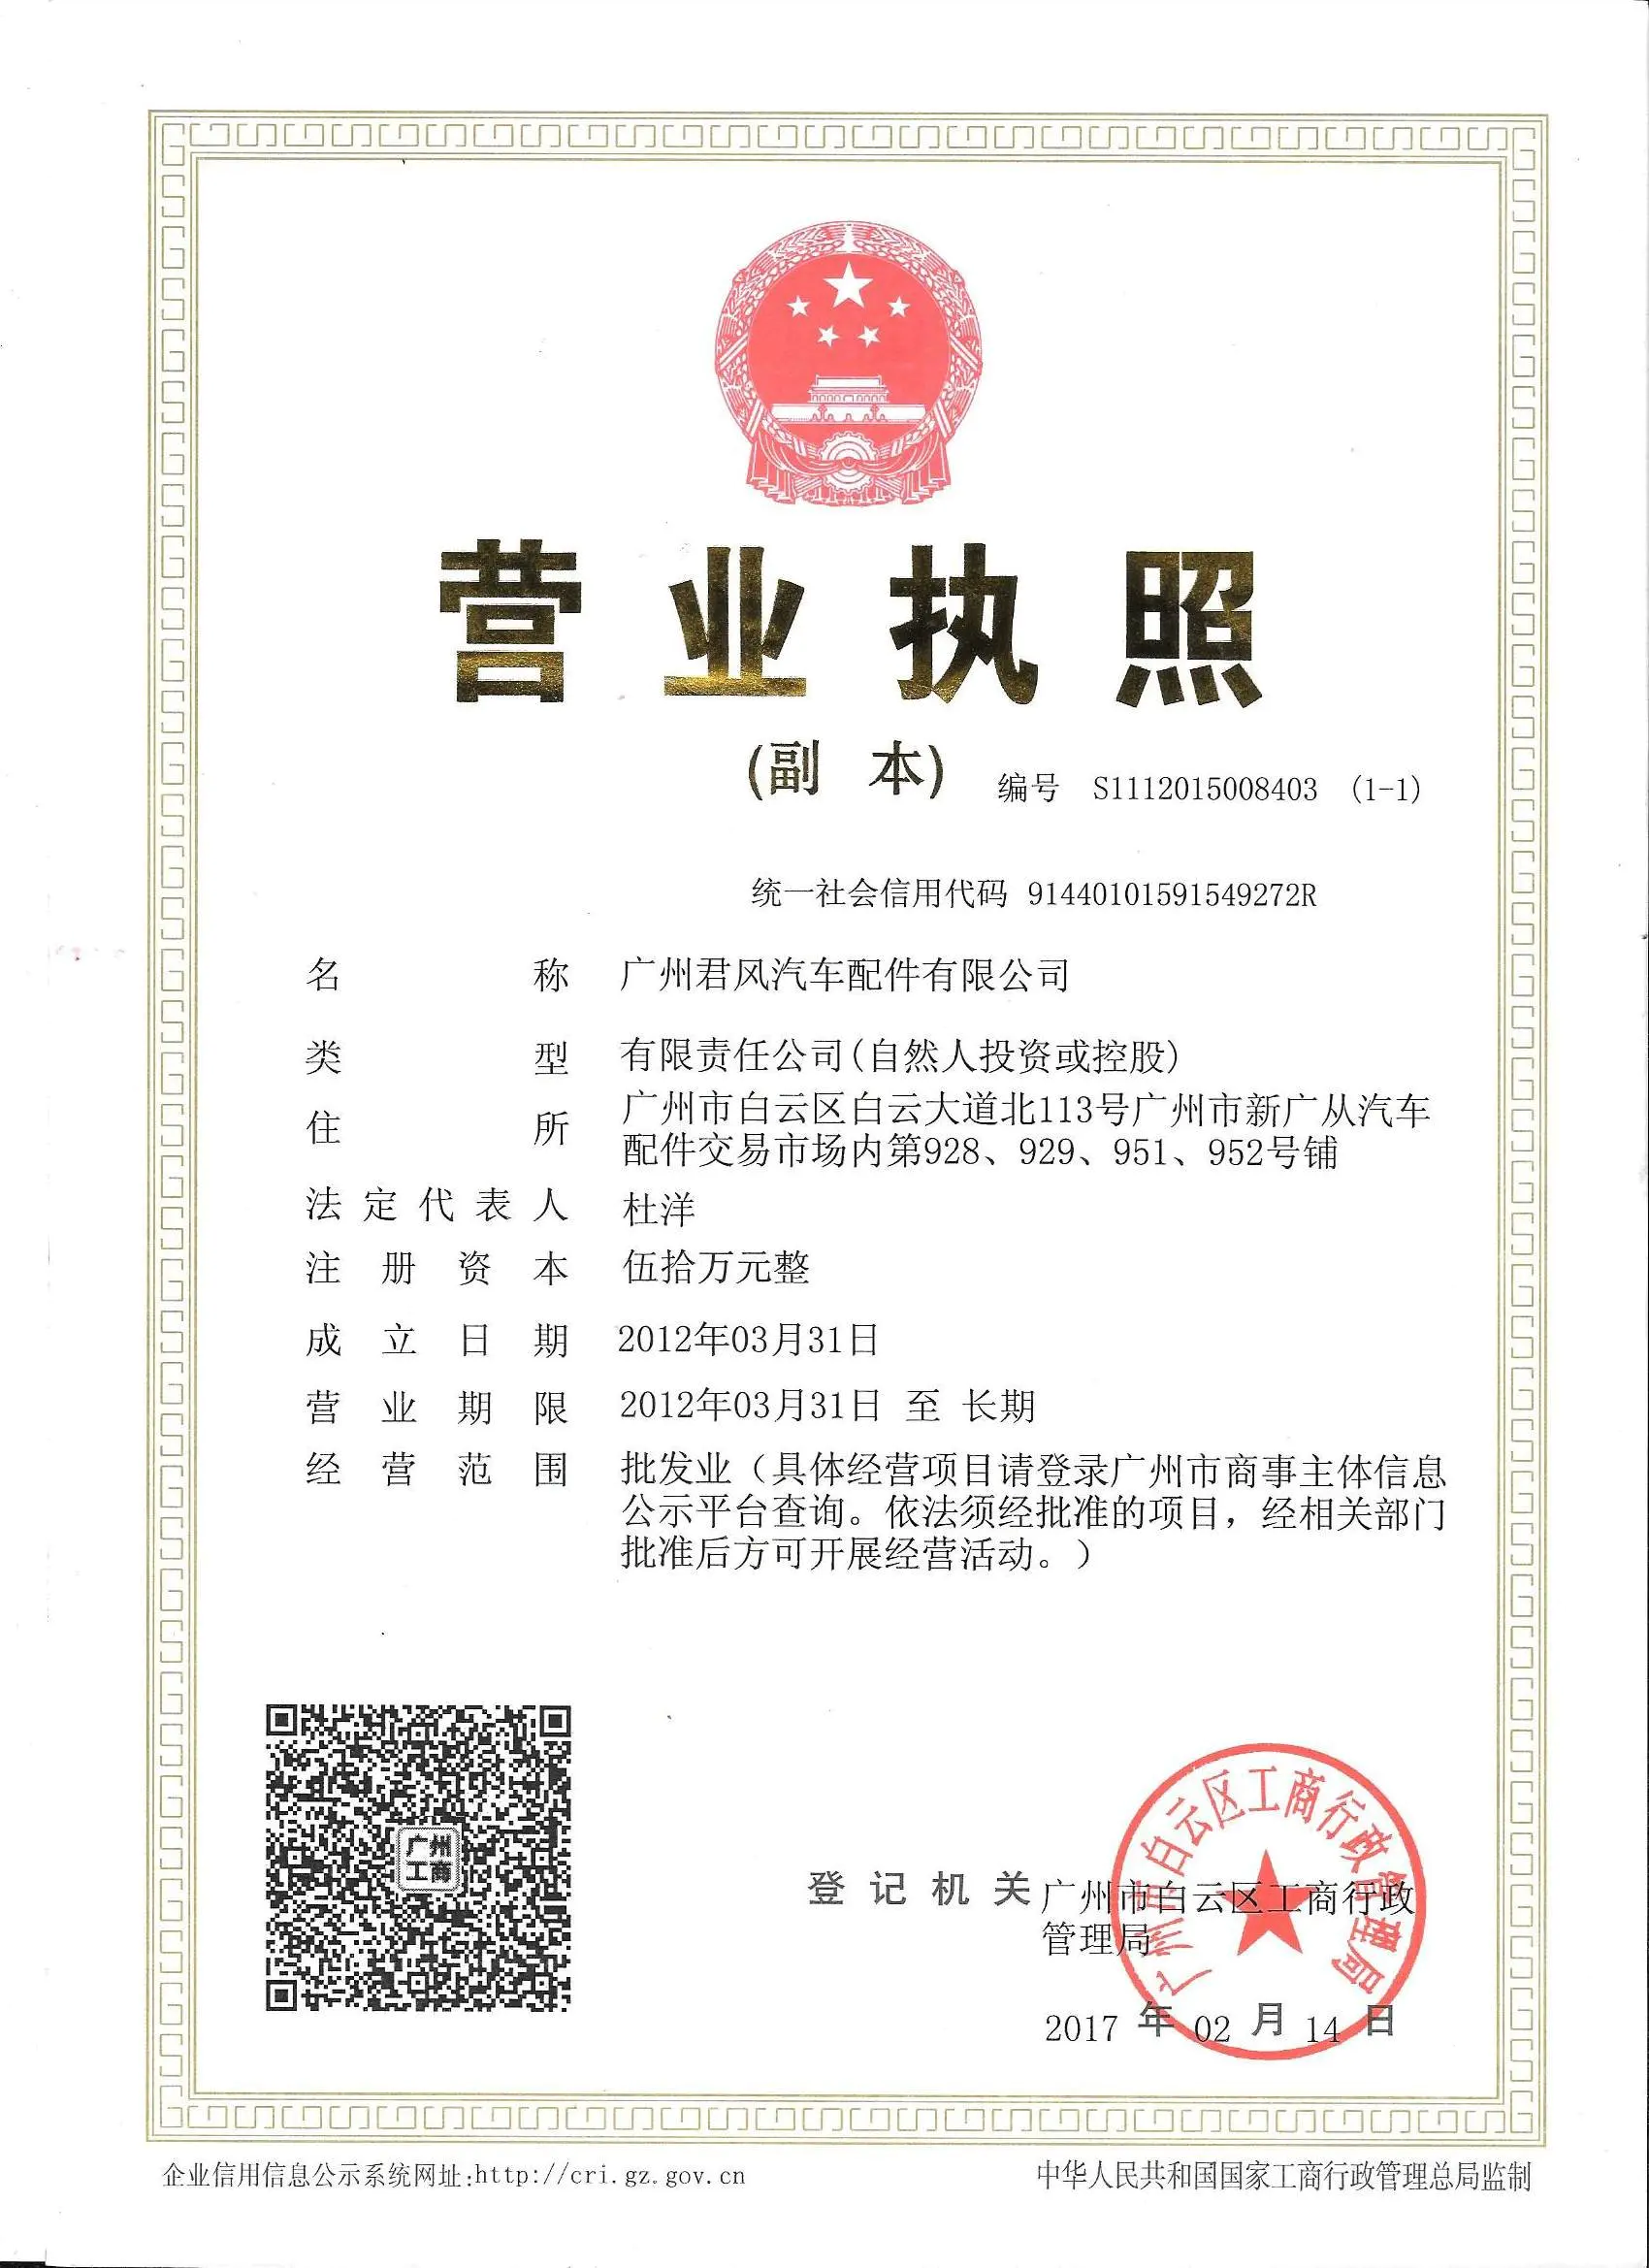 Junfeng turbo certificate1